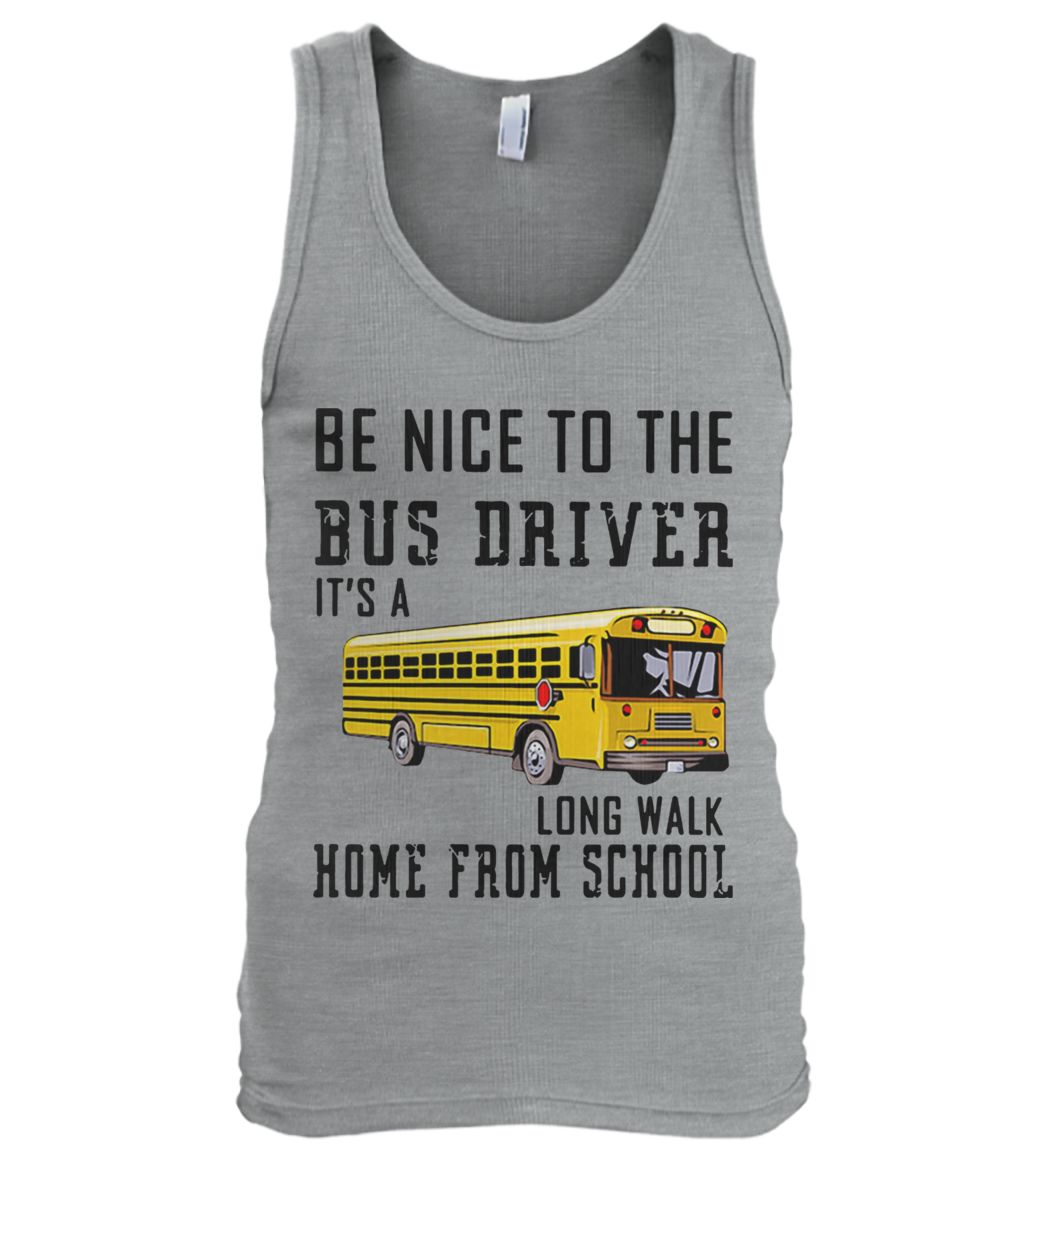 Be nice to the bus driver it's a long walk home from school men's tank top